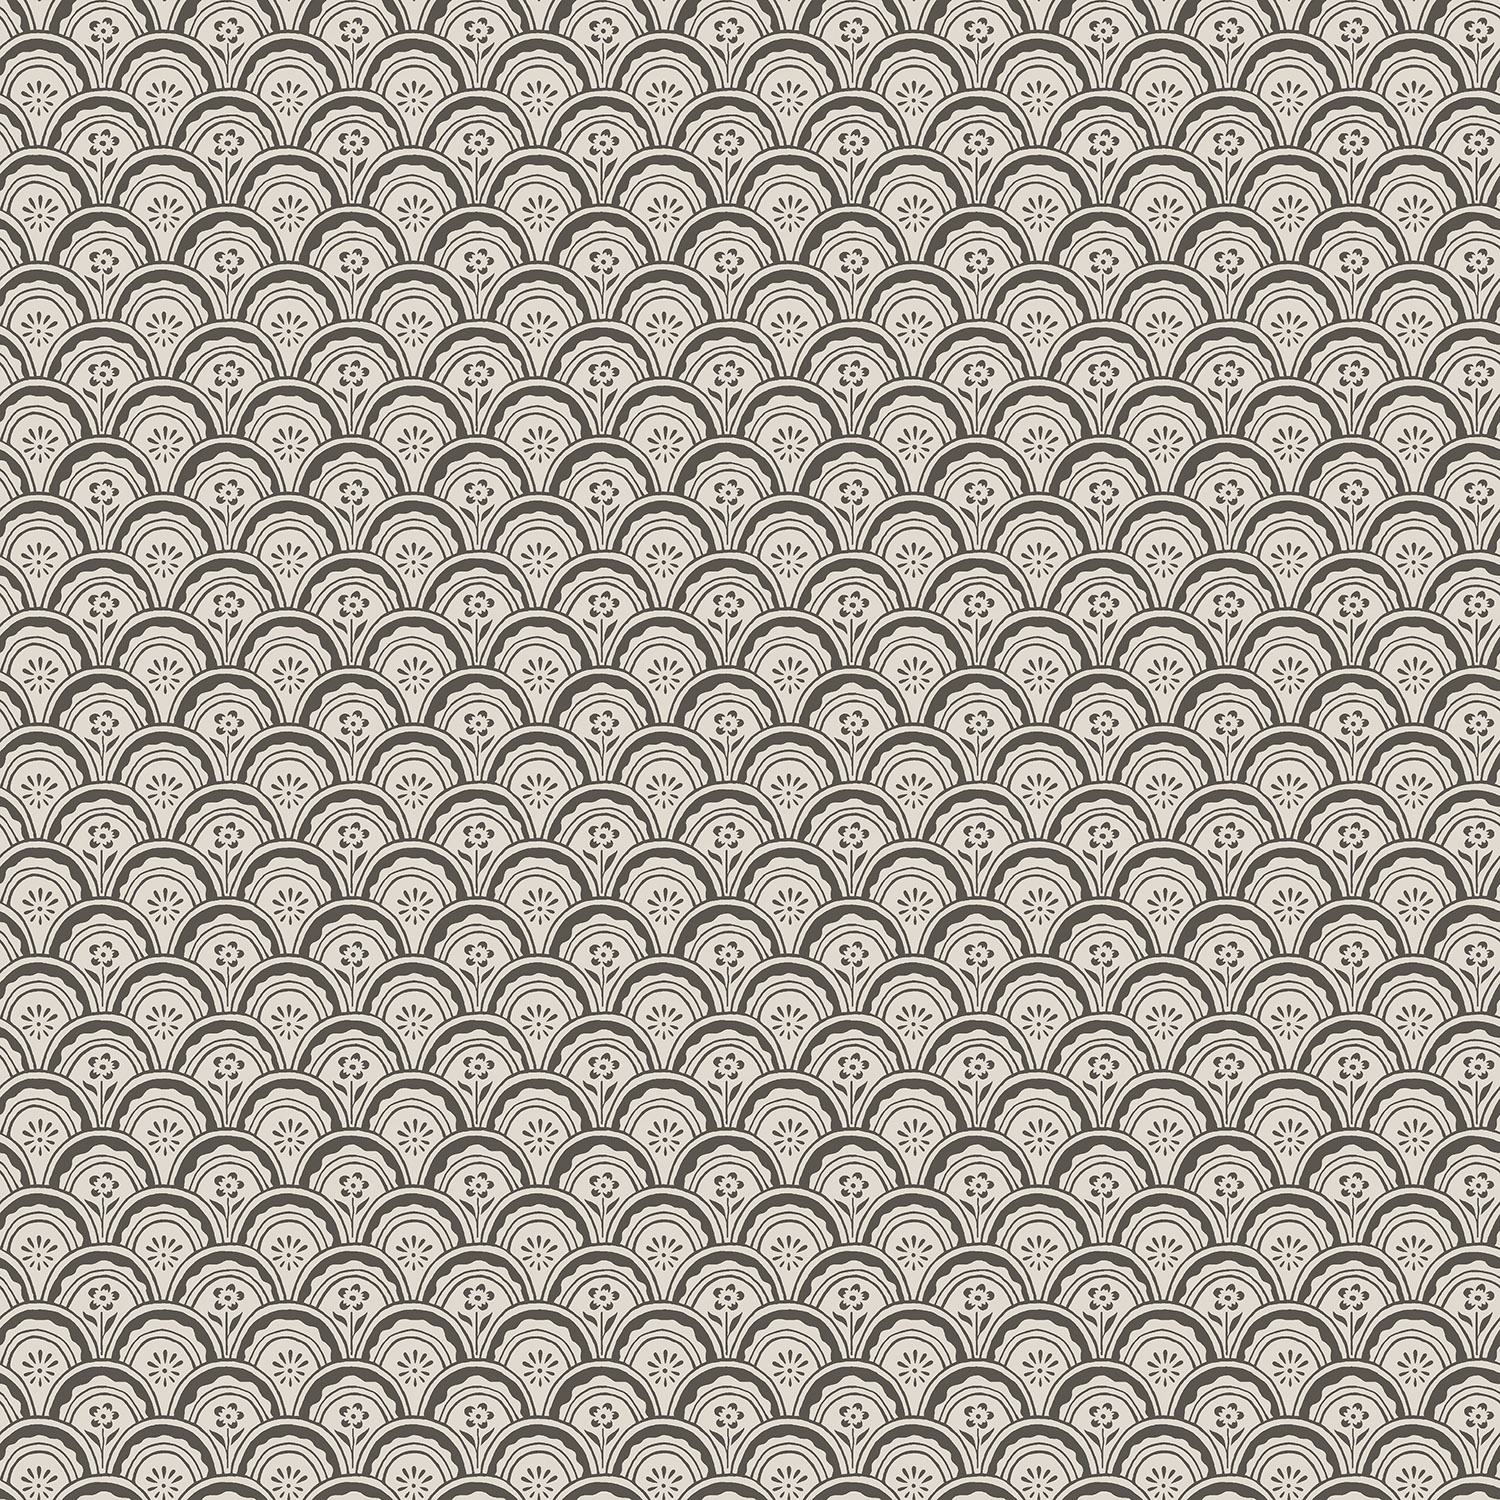 images/productimages/small/s10234-beata-graphite-sandberg-wallpaper-product.jpg